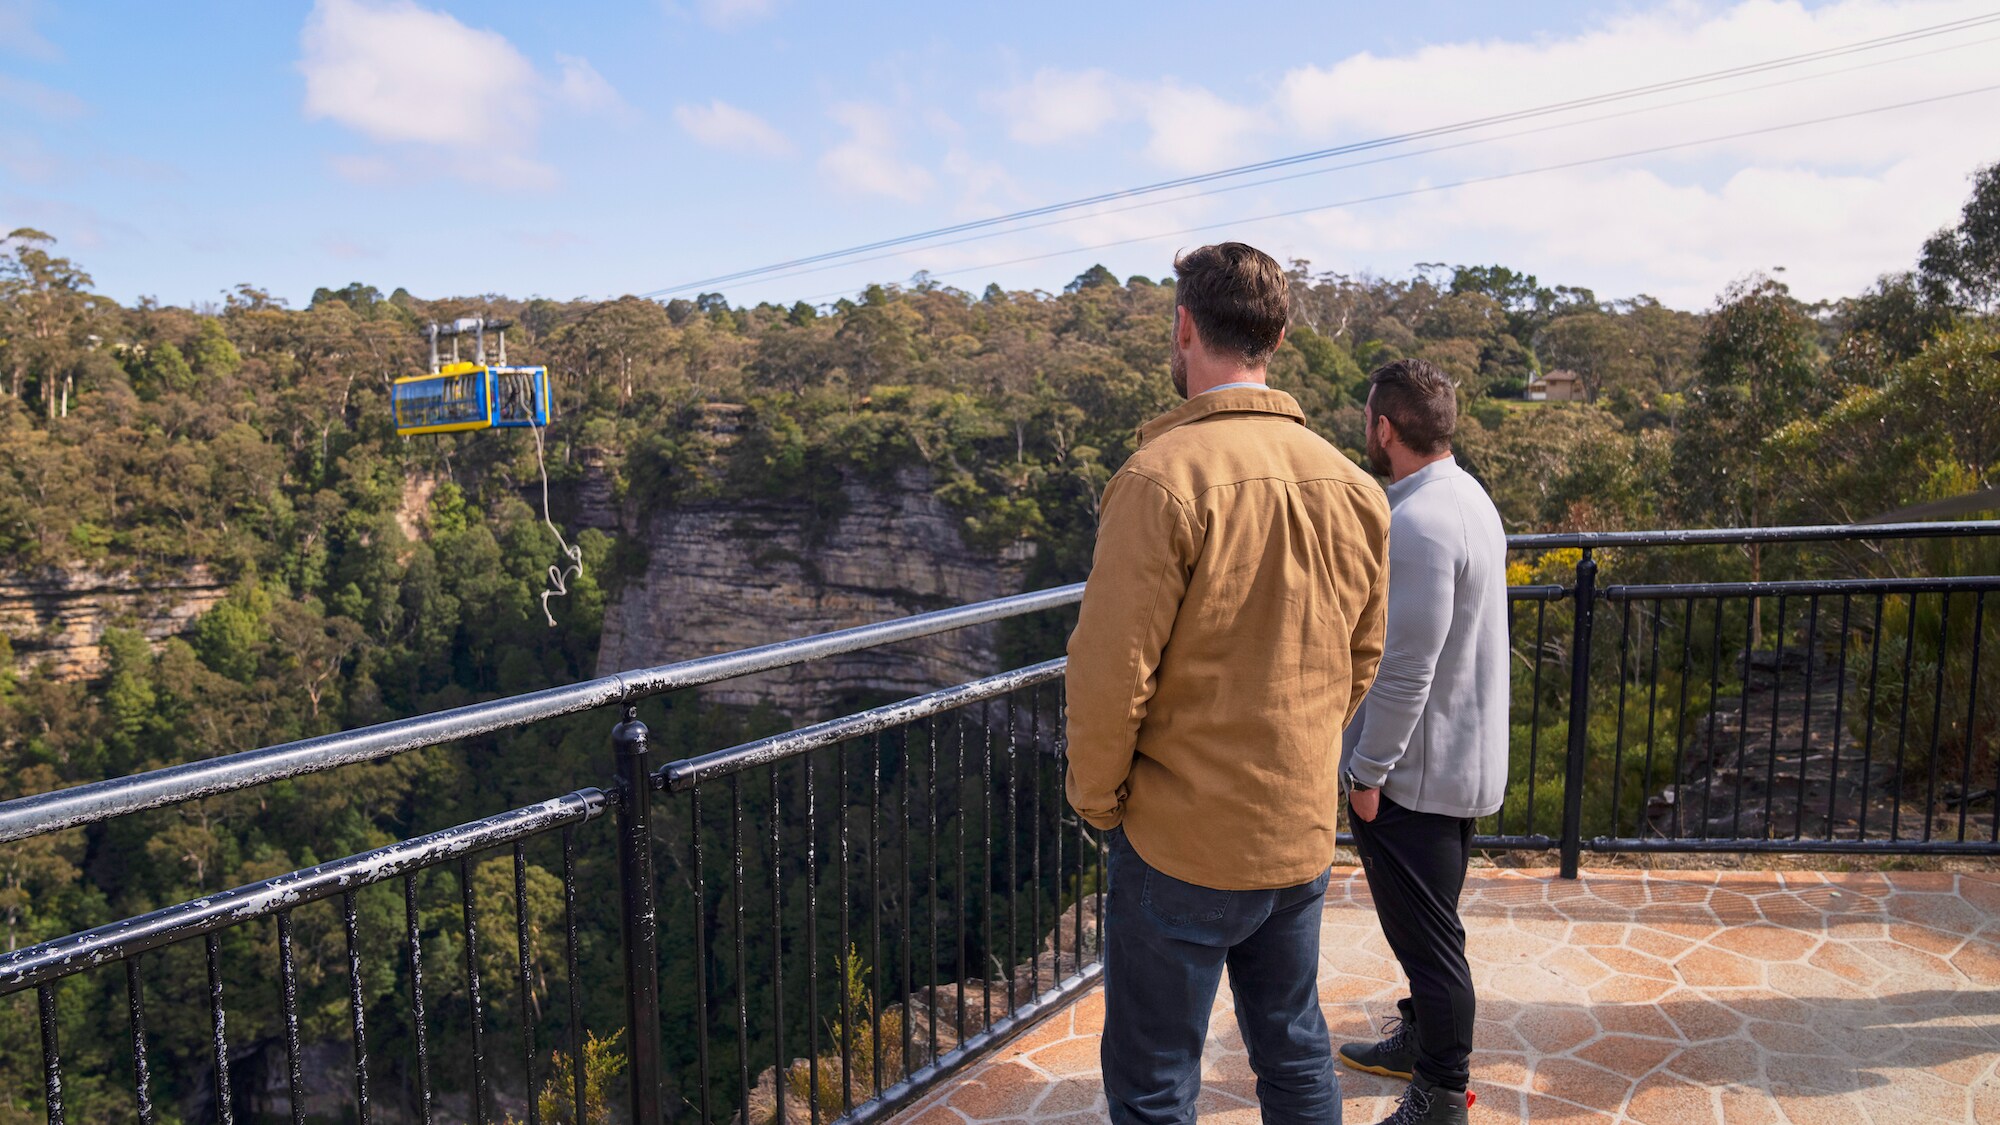 Chris Hemsworth and sports scientist Ross Edgley gaze out at a cable cart suspended over a canyon with a 100-foot-long rope hanging from it. Chris will train to climb this rope with help from Ross.  (National Geographic for Disney+/Craig Parry)